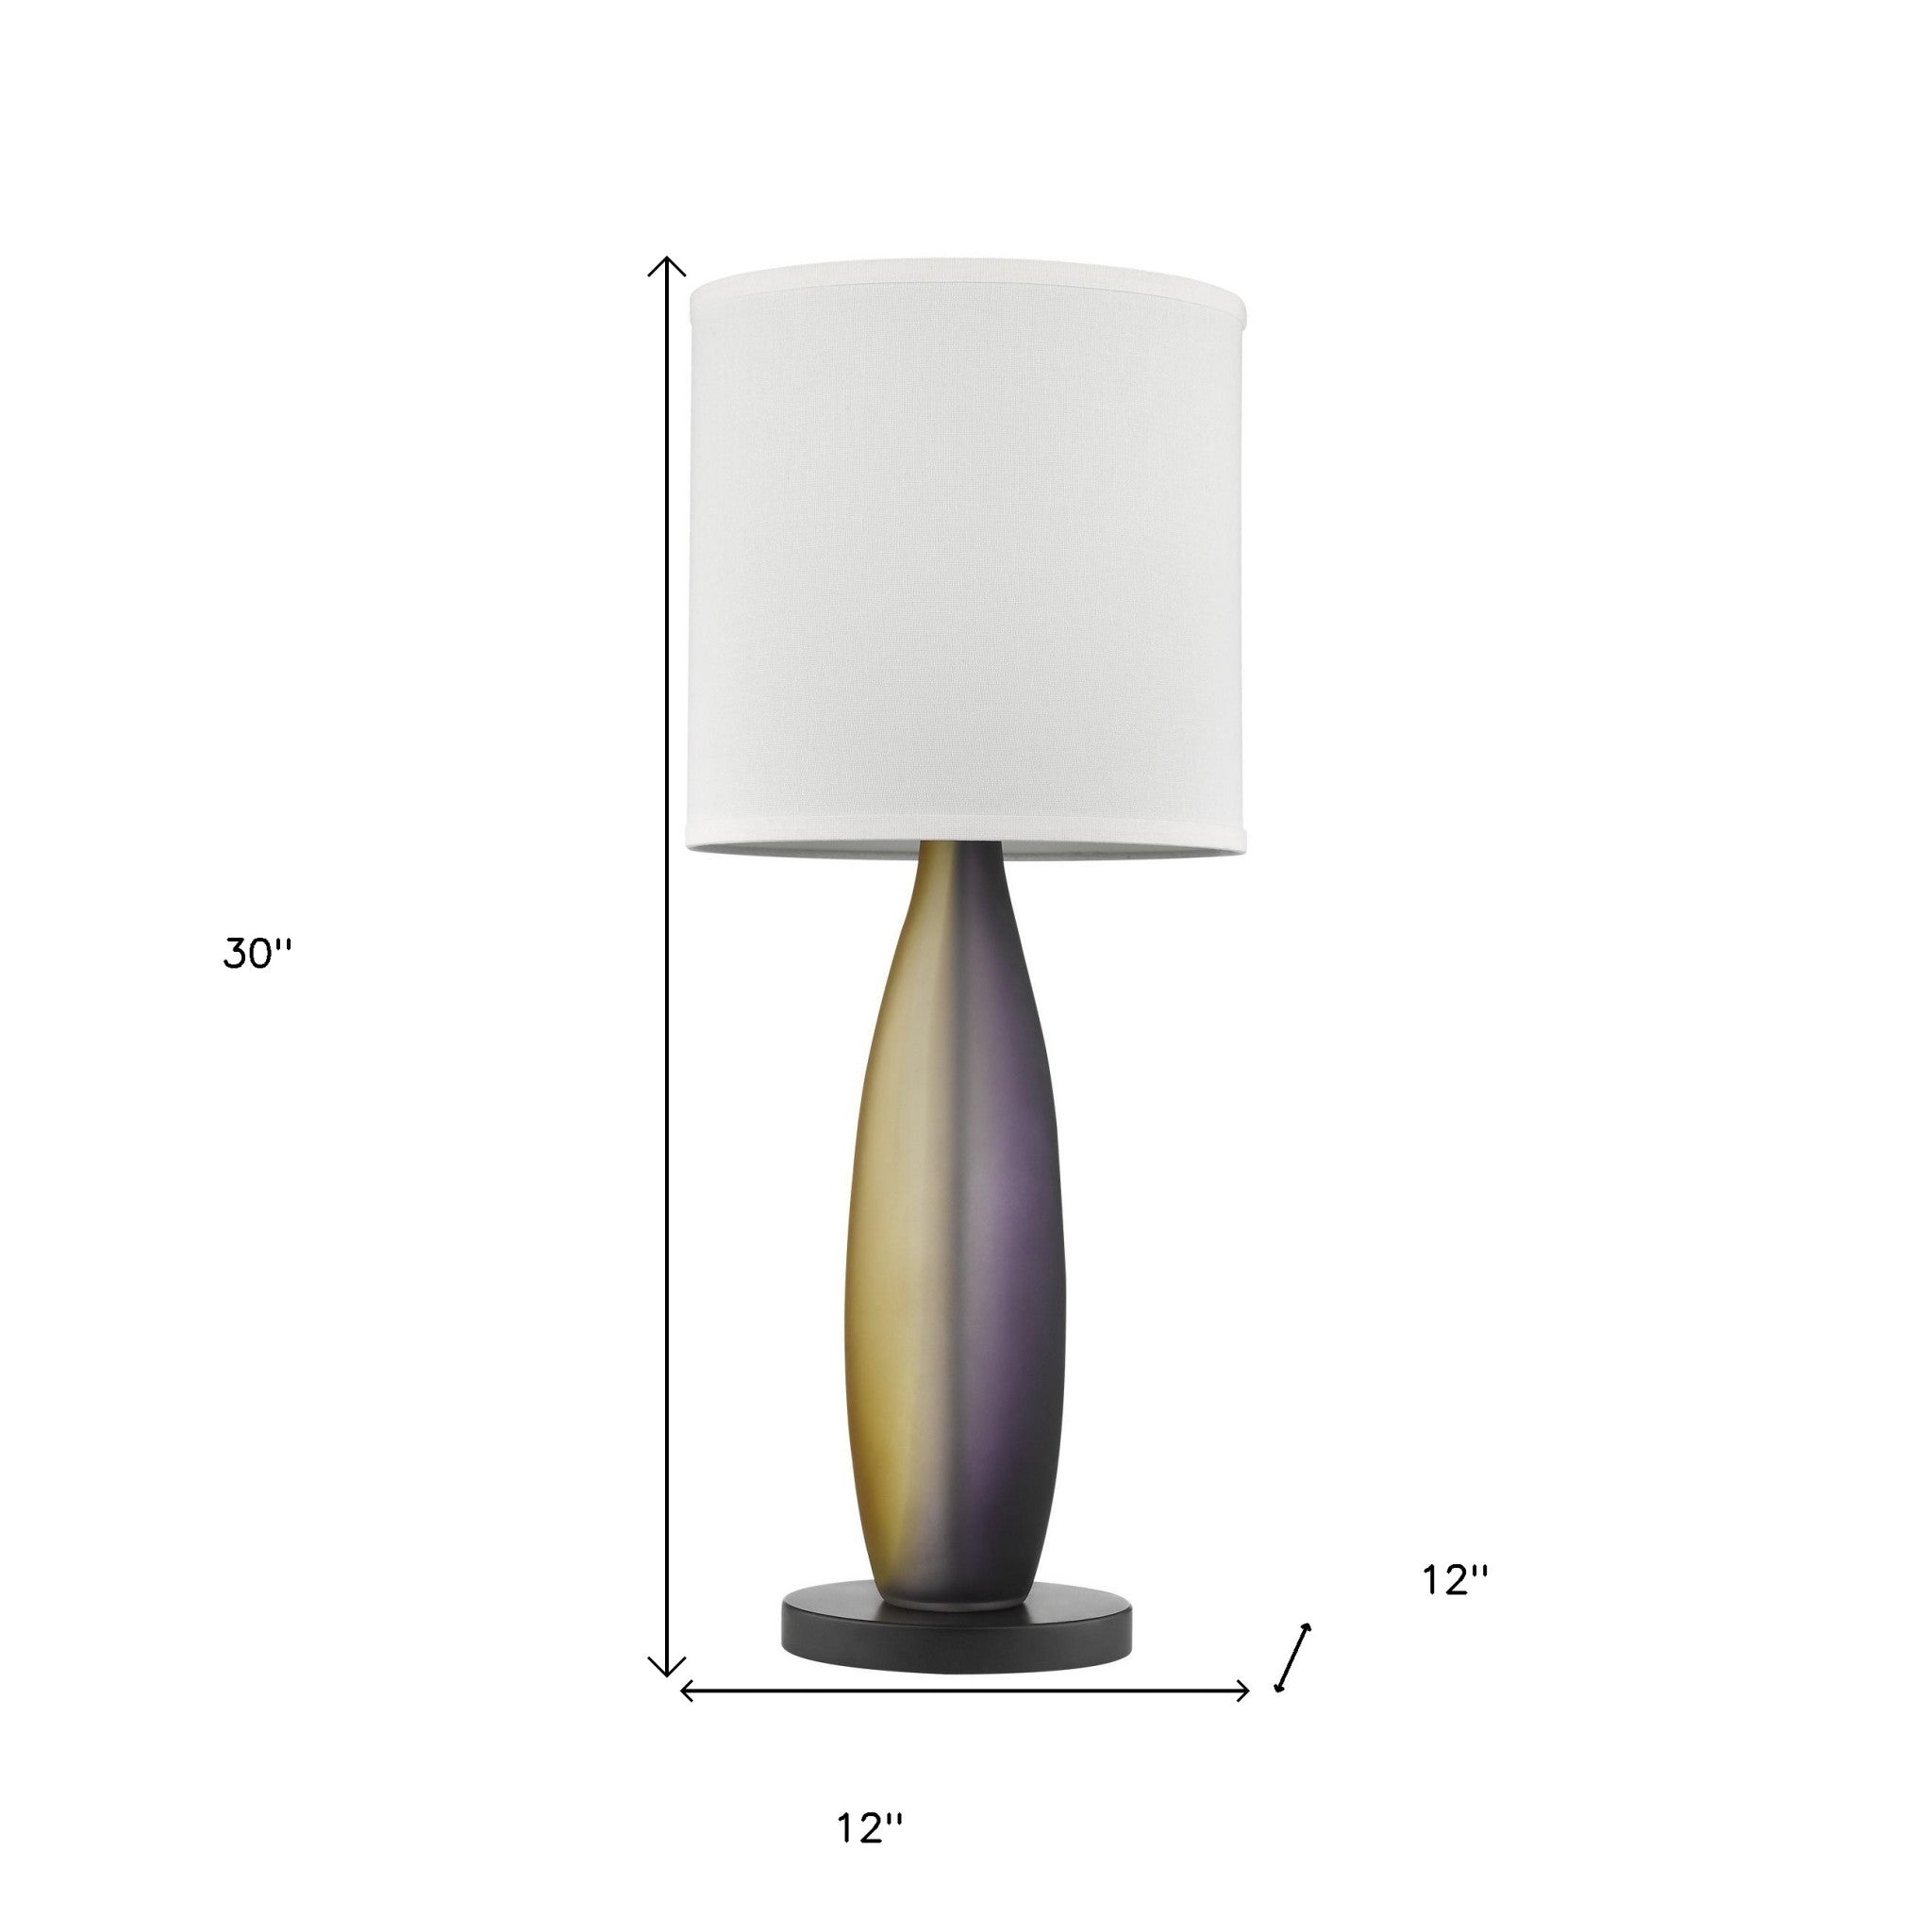 30" Ebony Lacquer Solid Wood Standard Table Lamp With White Shade